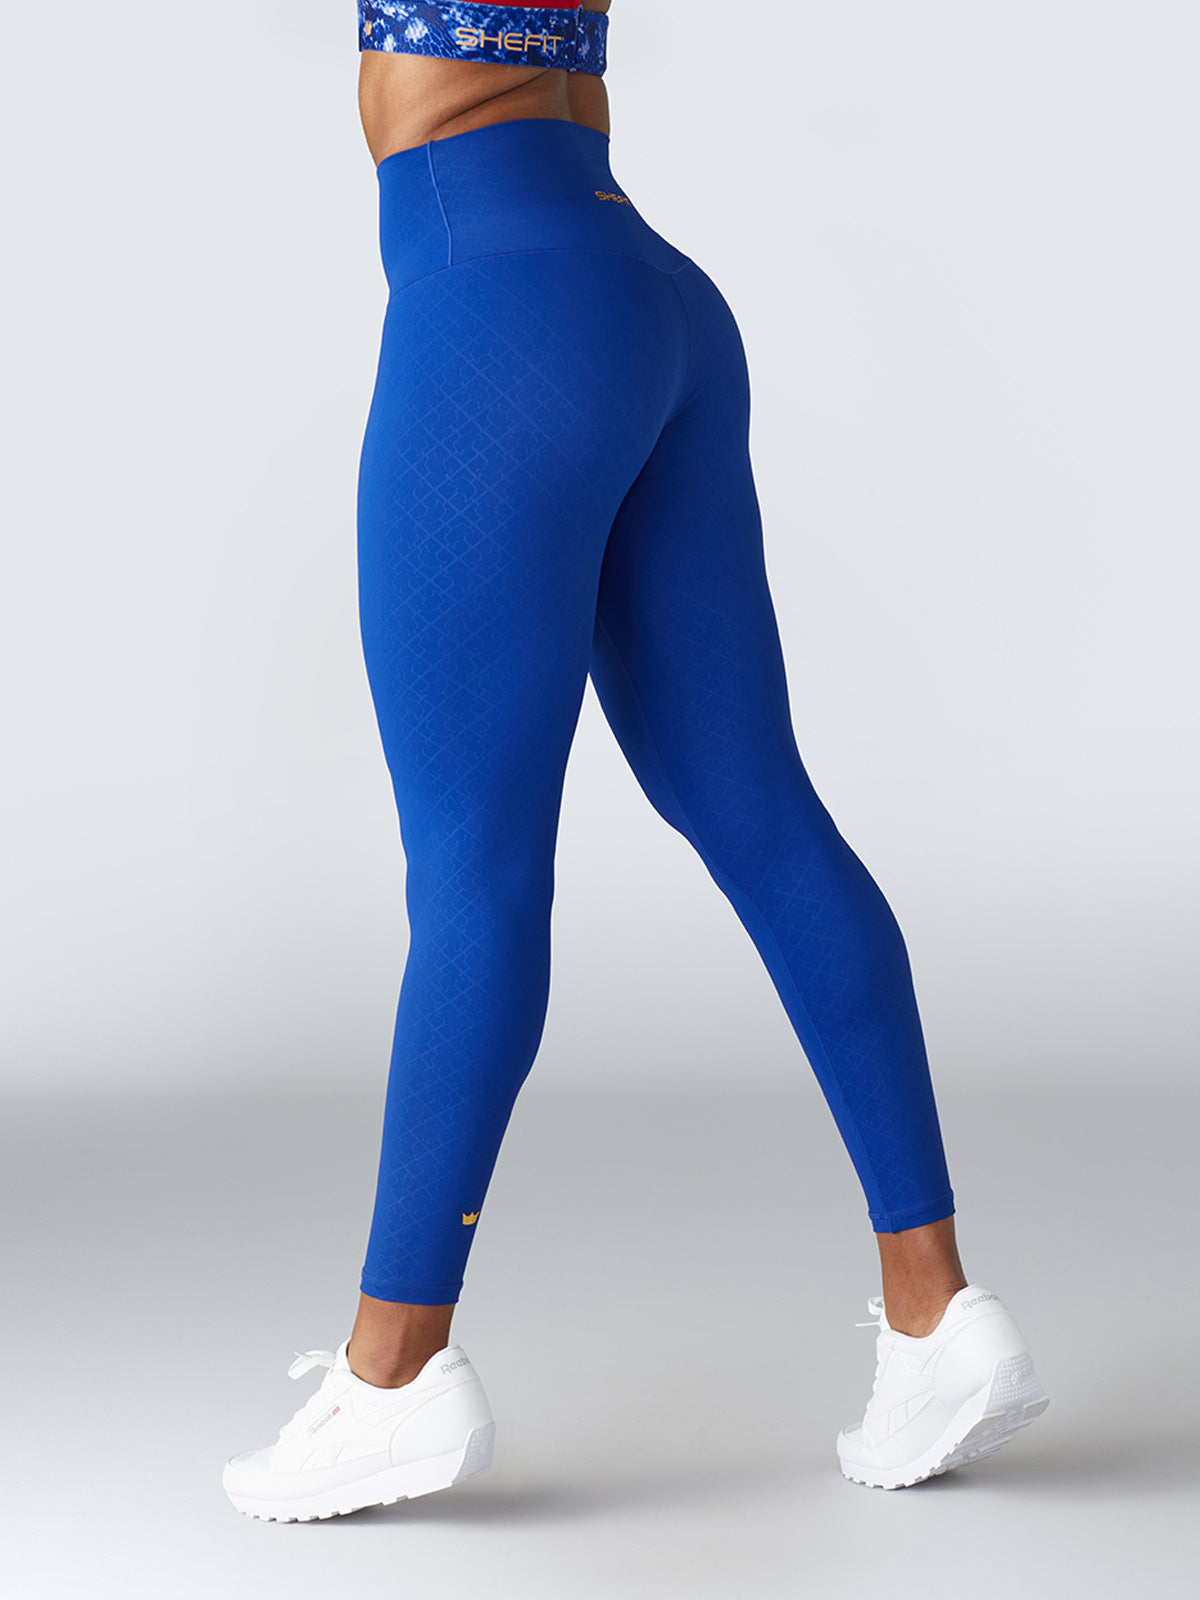 Performance Creator Collection Blue Tights & Leggings.